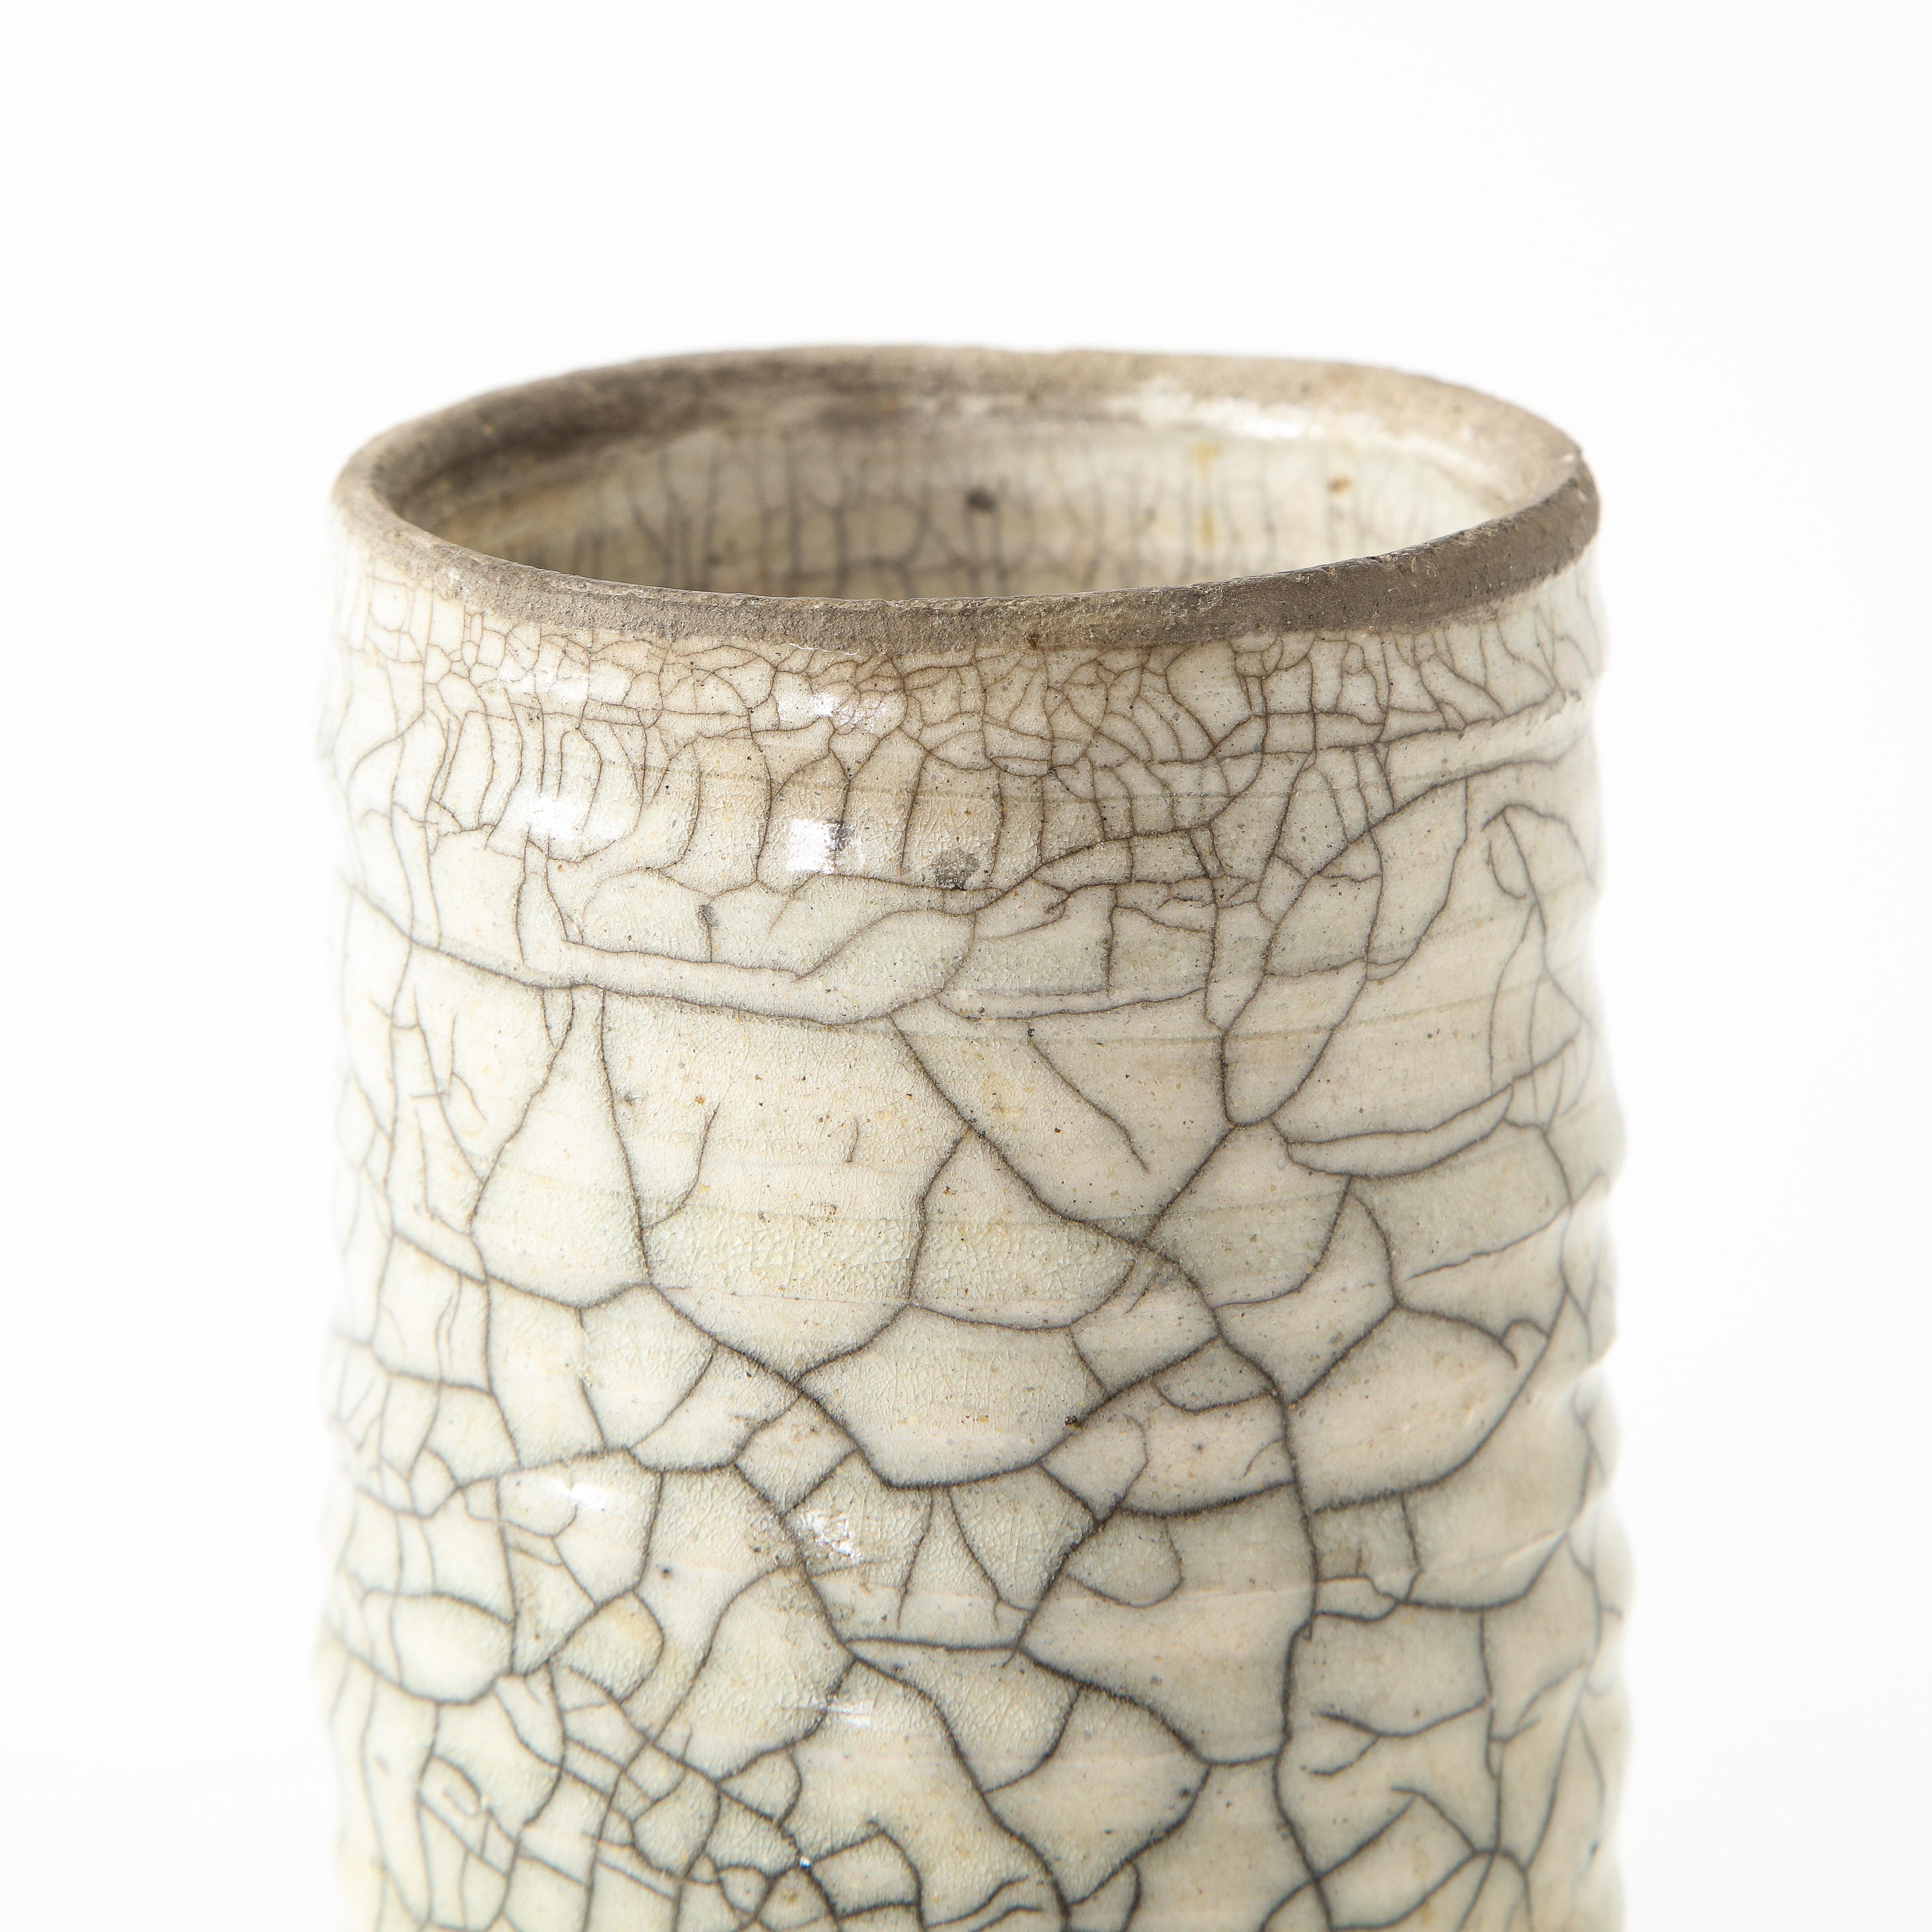 Off-White Ceramic Vase with Intricate Crackling 4